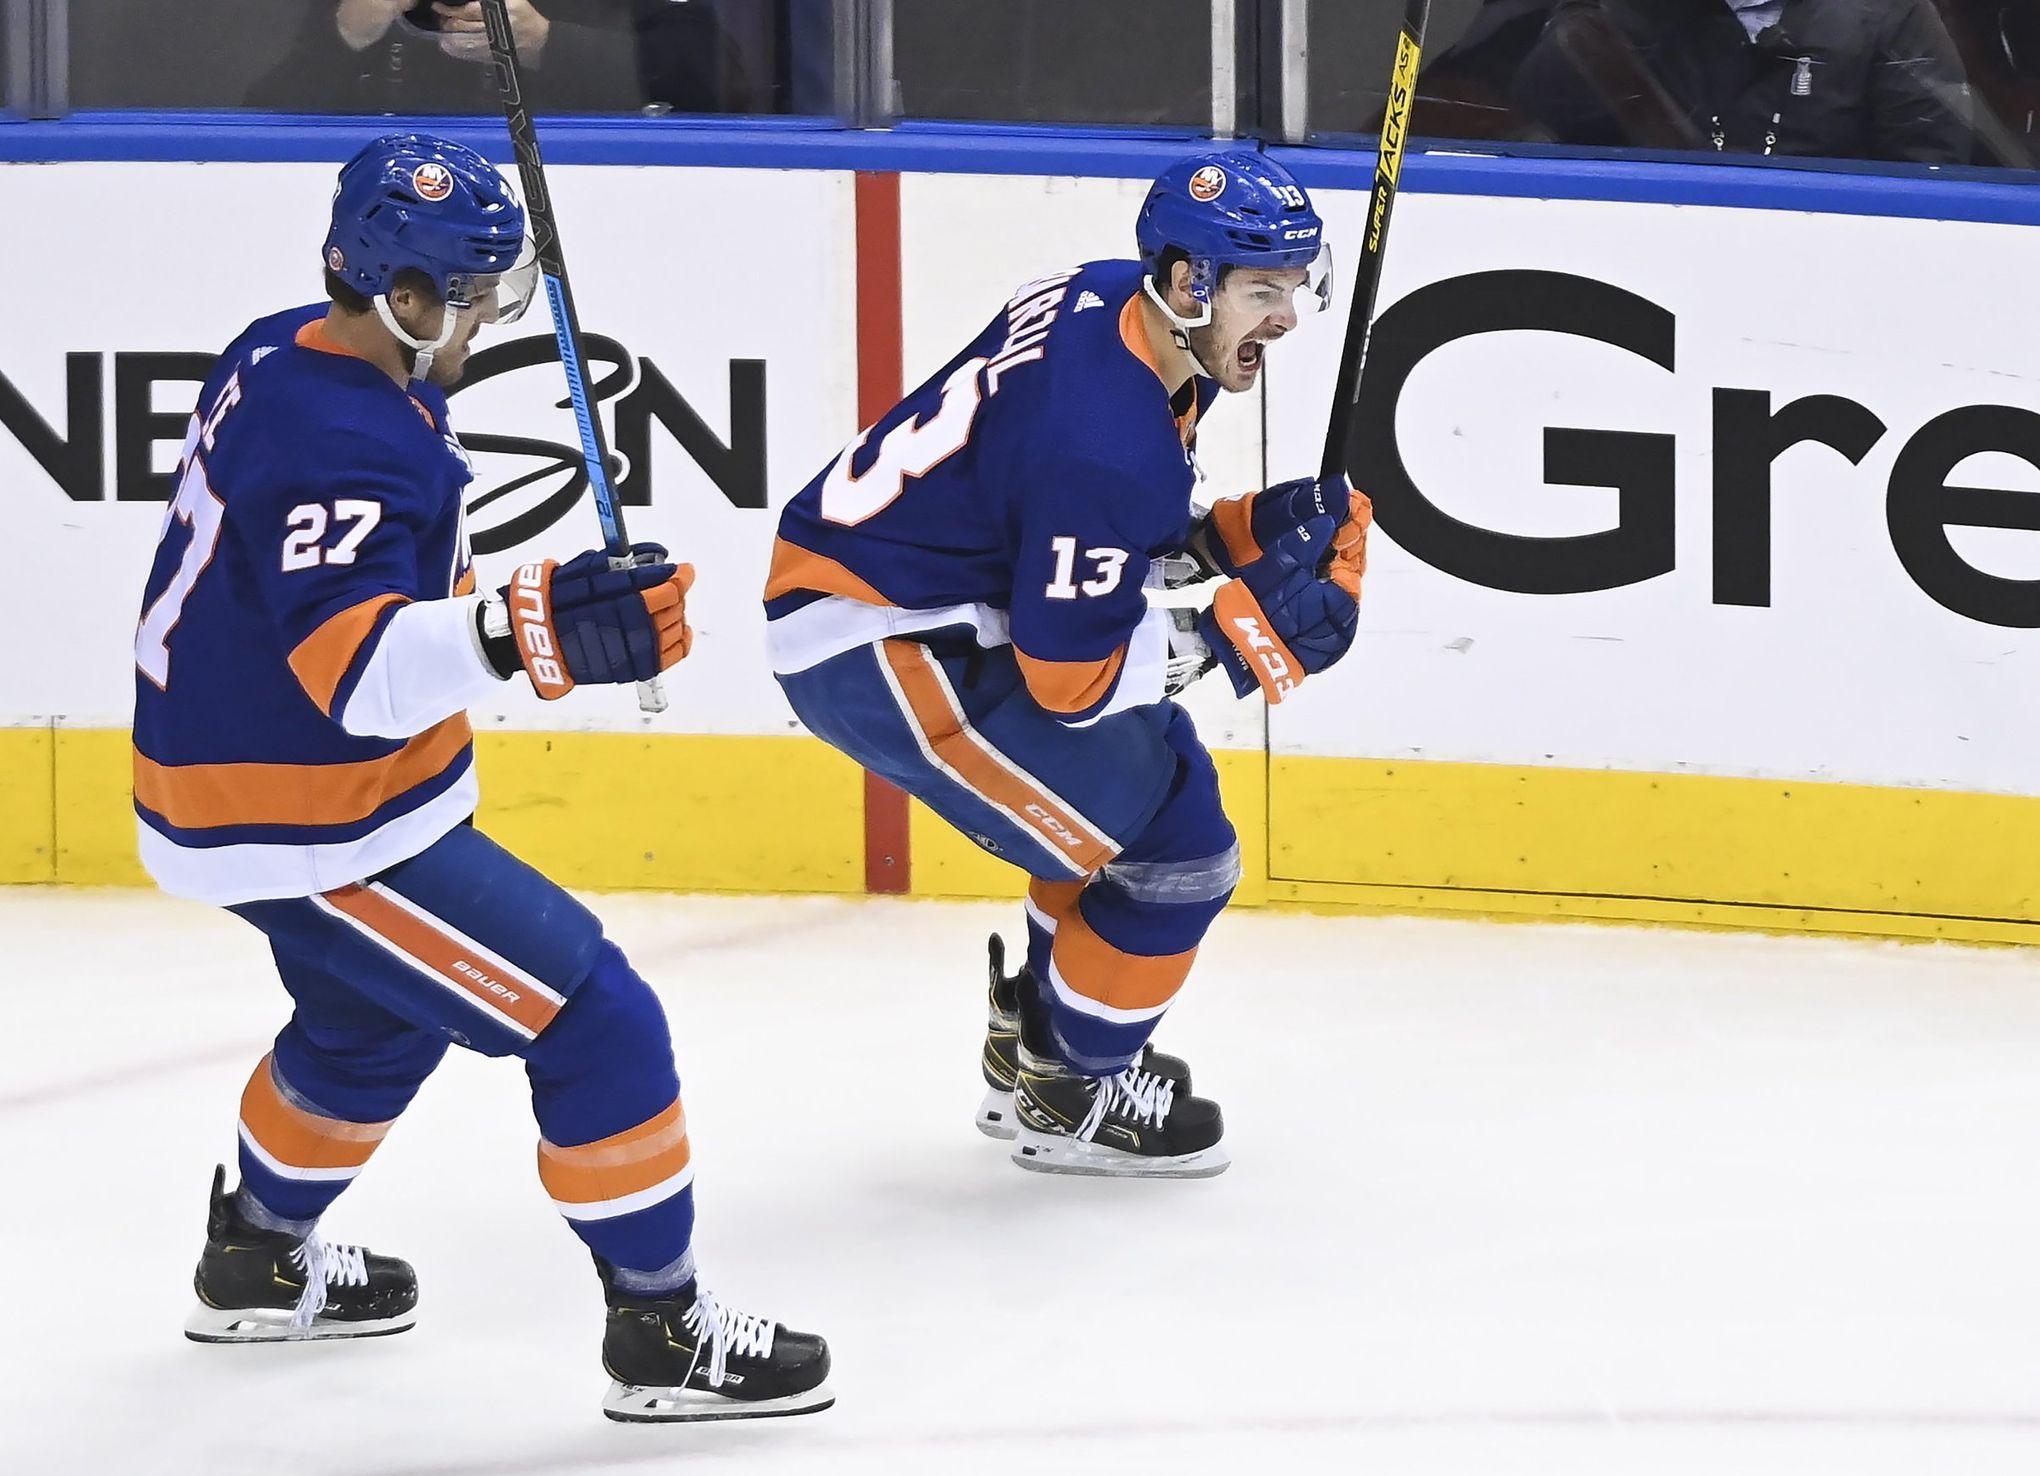 NY Islanders Barzal: I have to be among the top players in the League